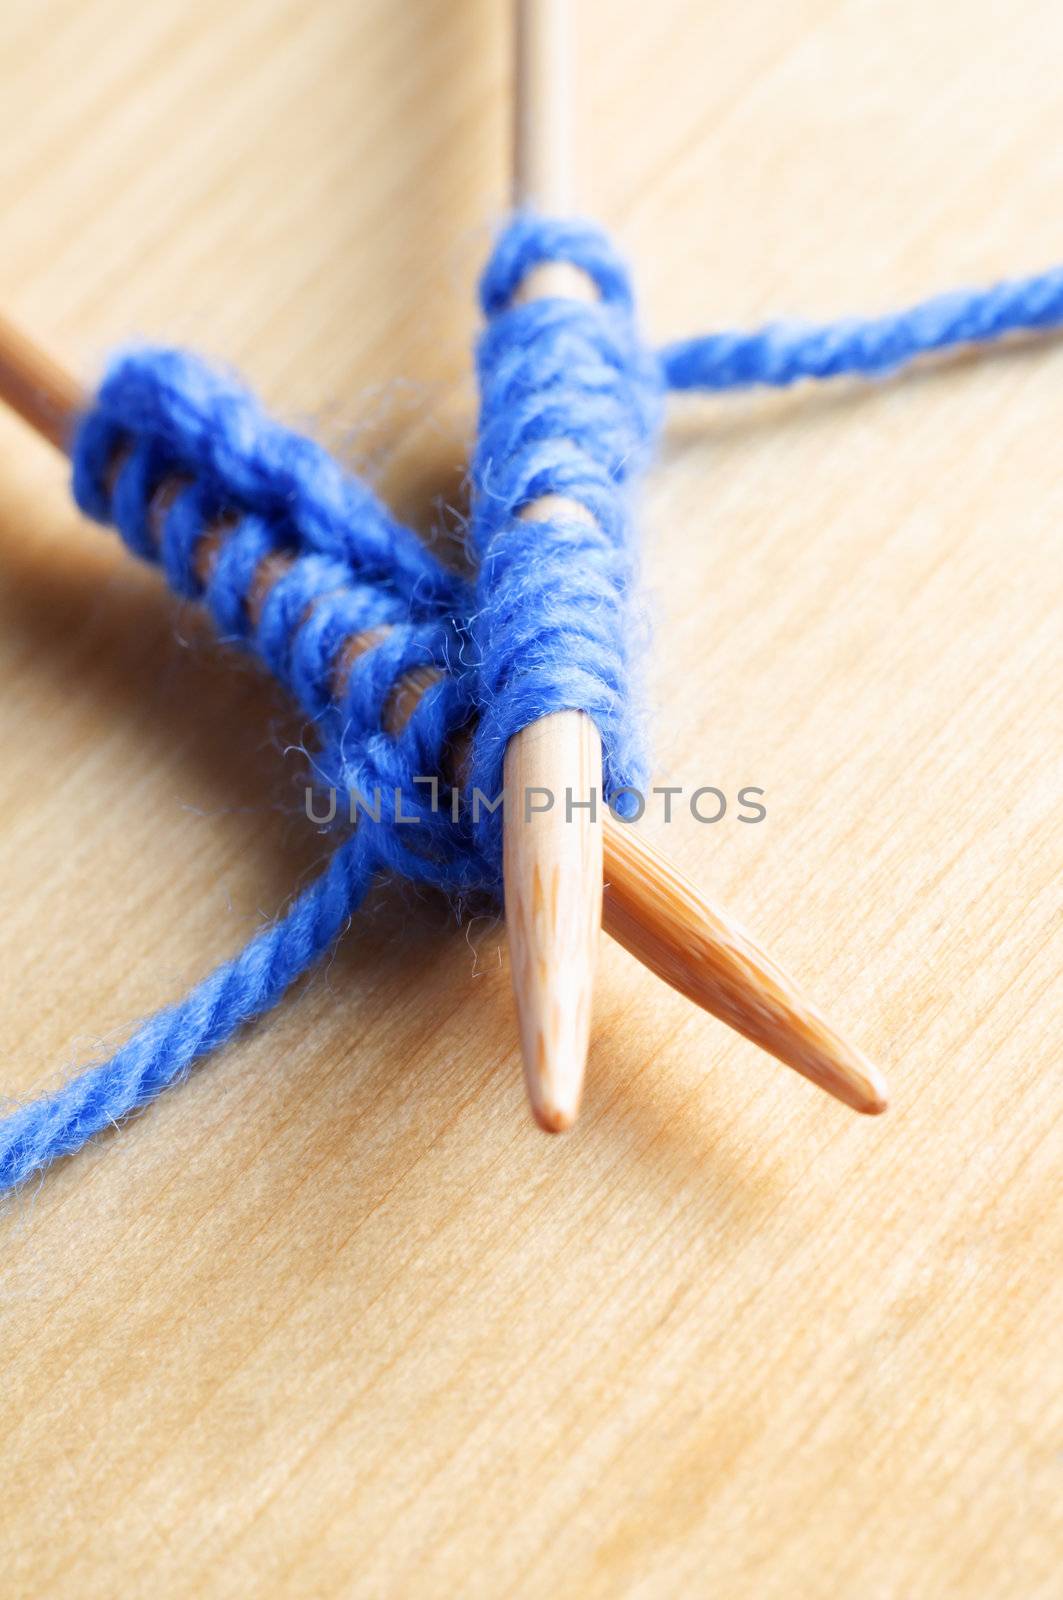 Close up (macro) of a pair of crossed  knitting needles laid on a wooden table holding stitches in pale blue wool.